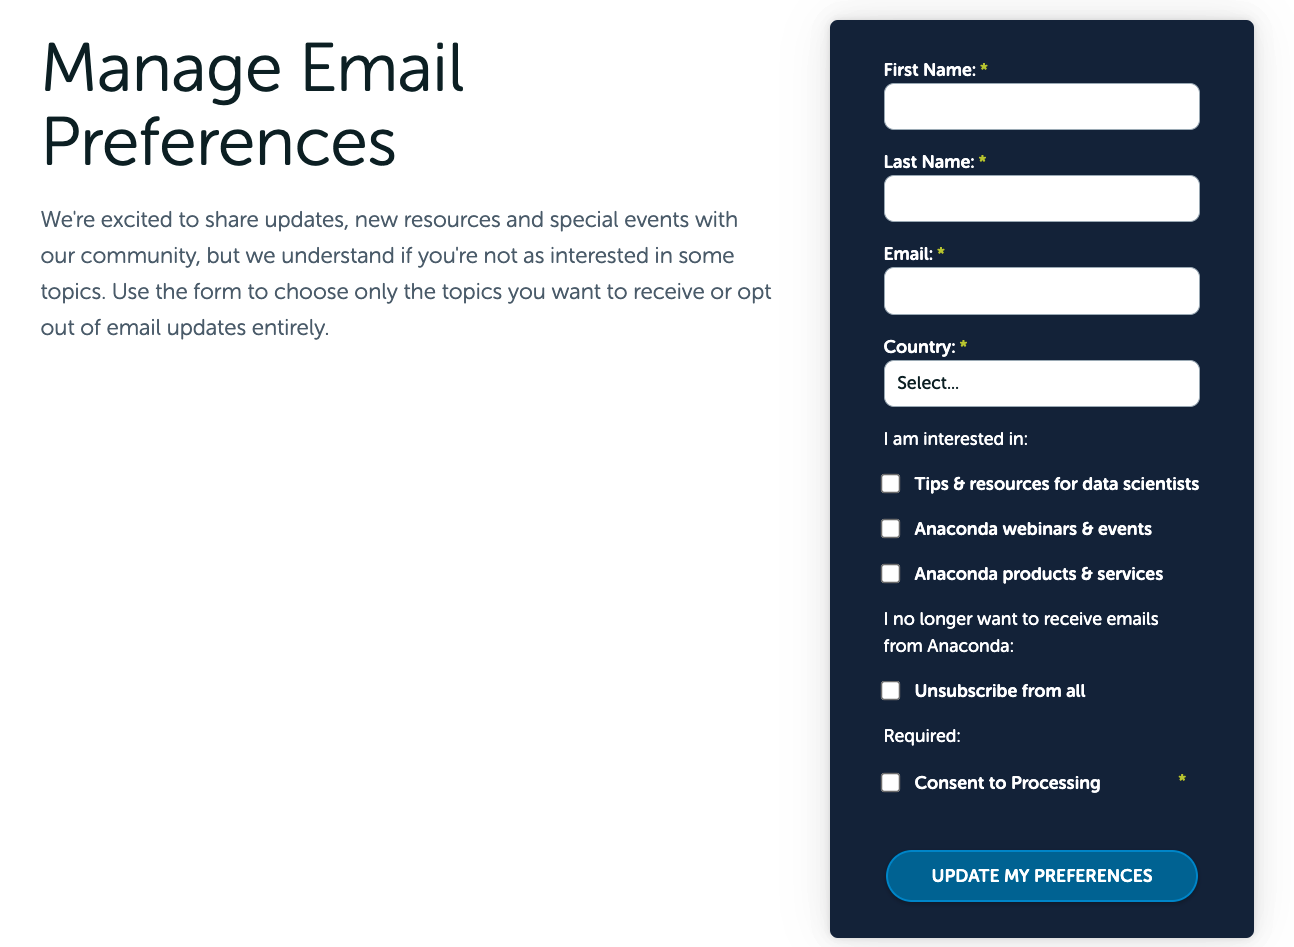 ../../_images/ce_manage_email_preferences2.png